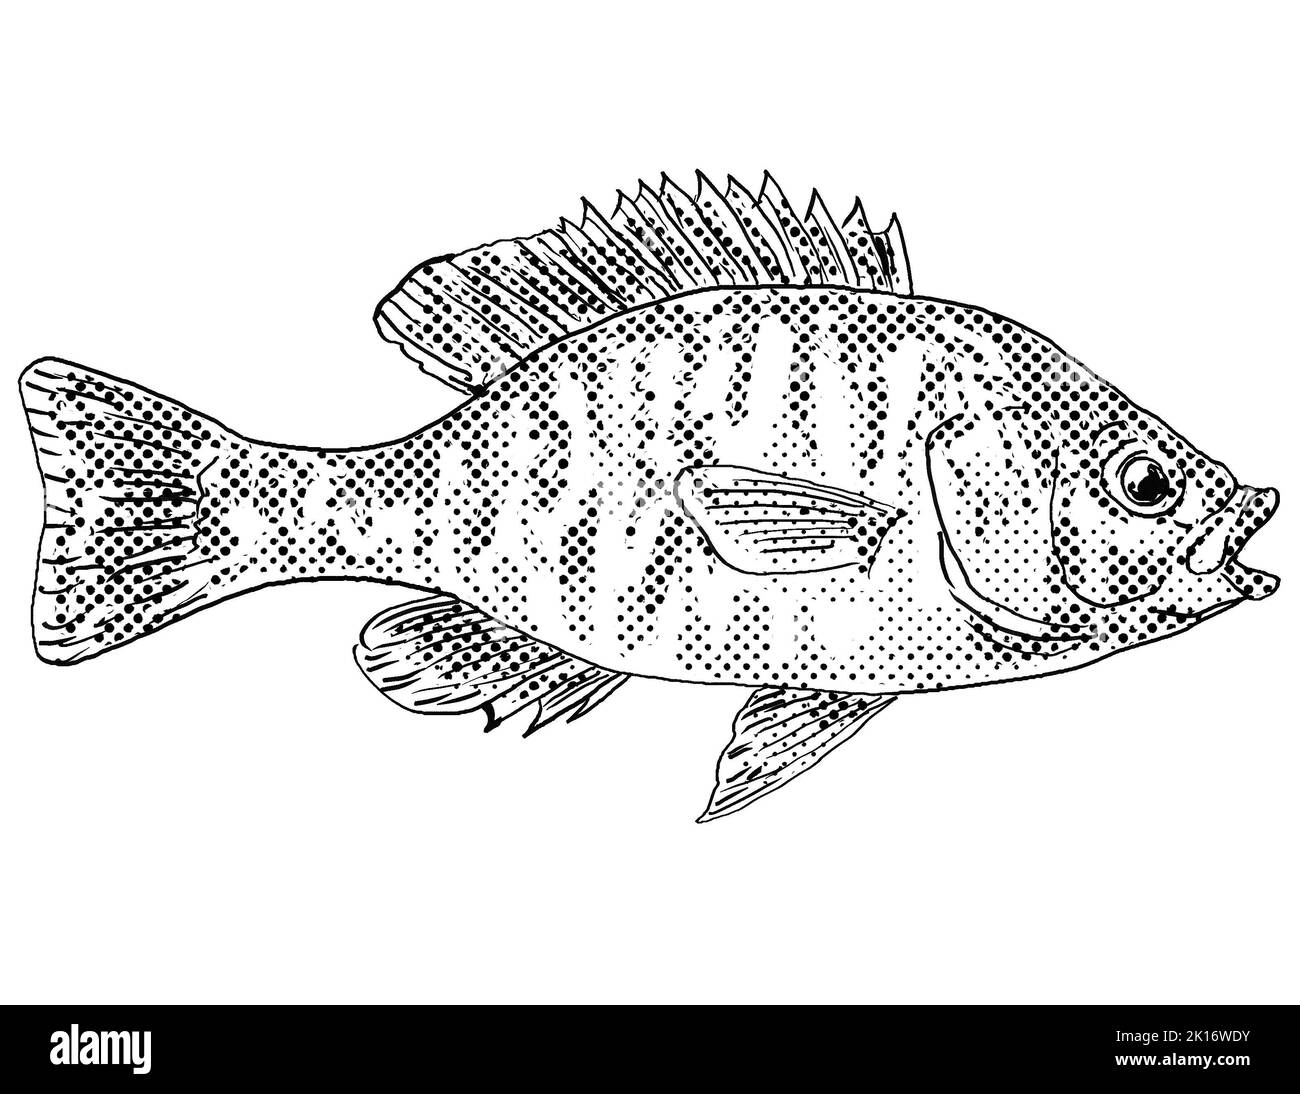 Cartoon style line drawing of a greengill sunfish or Lepomis macrochirus cyanellus or hybrid sunfish,  a freshwater fish endemic to North America with Stock Photo